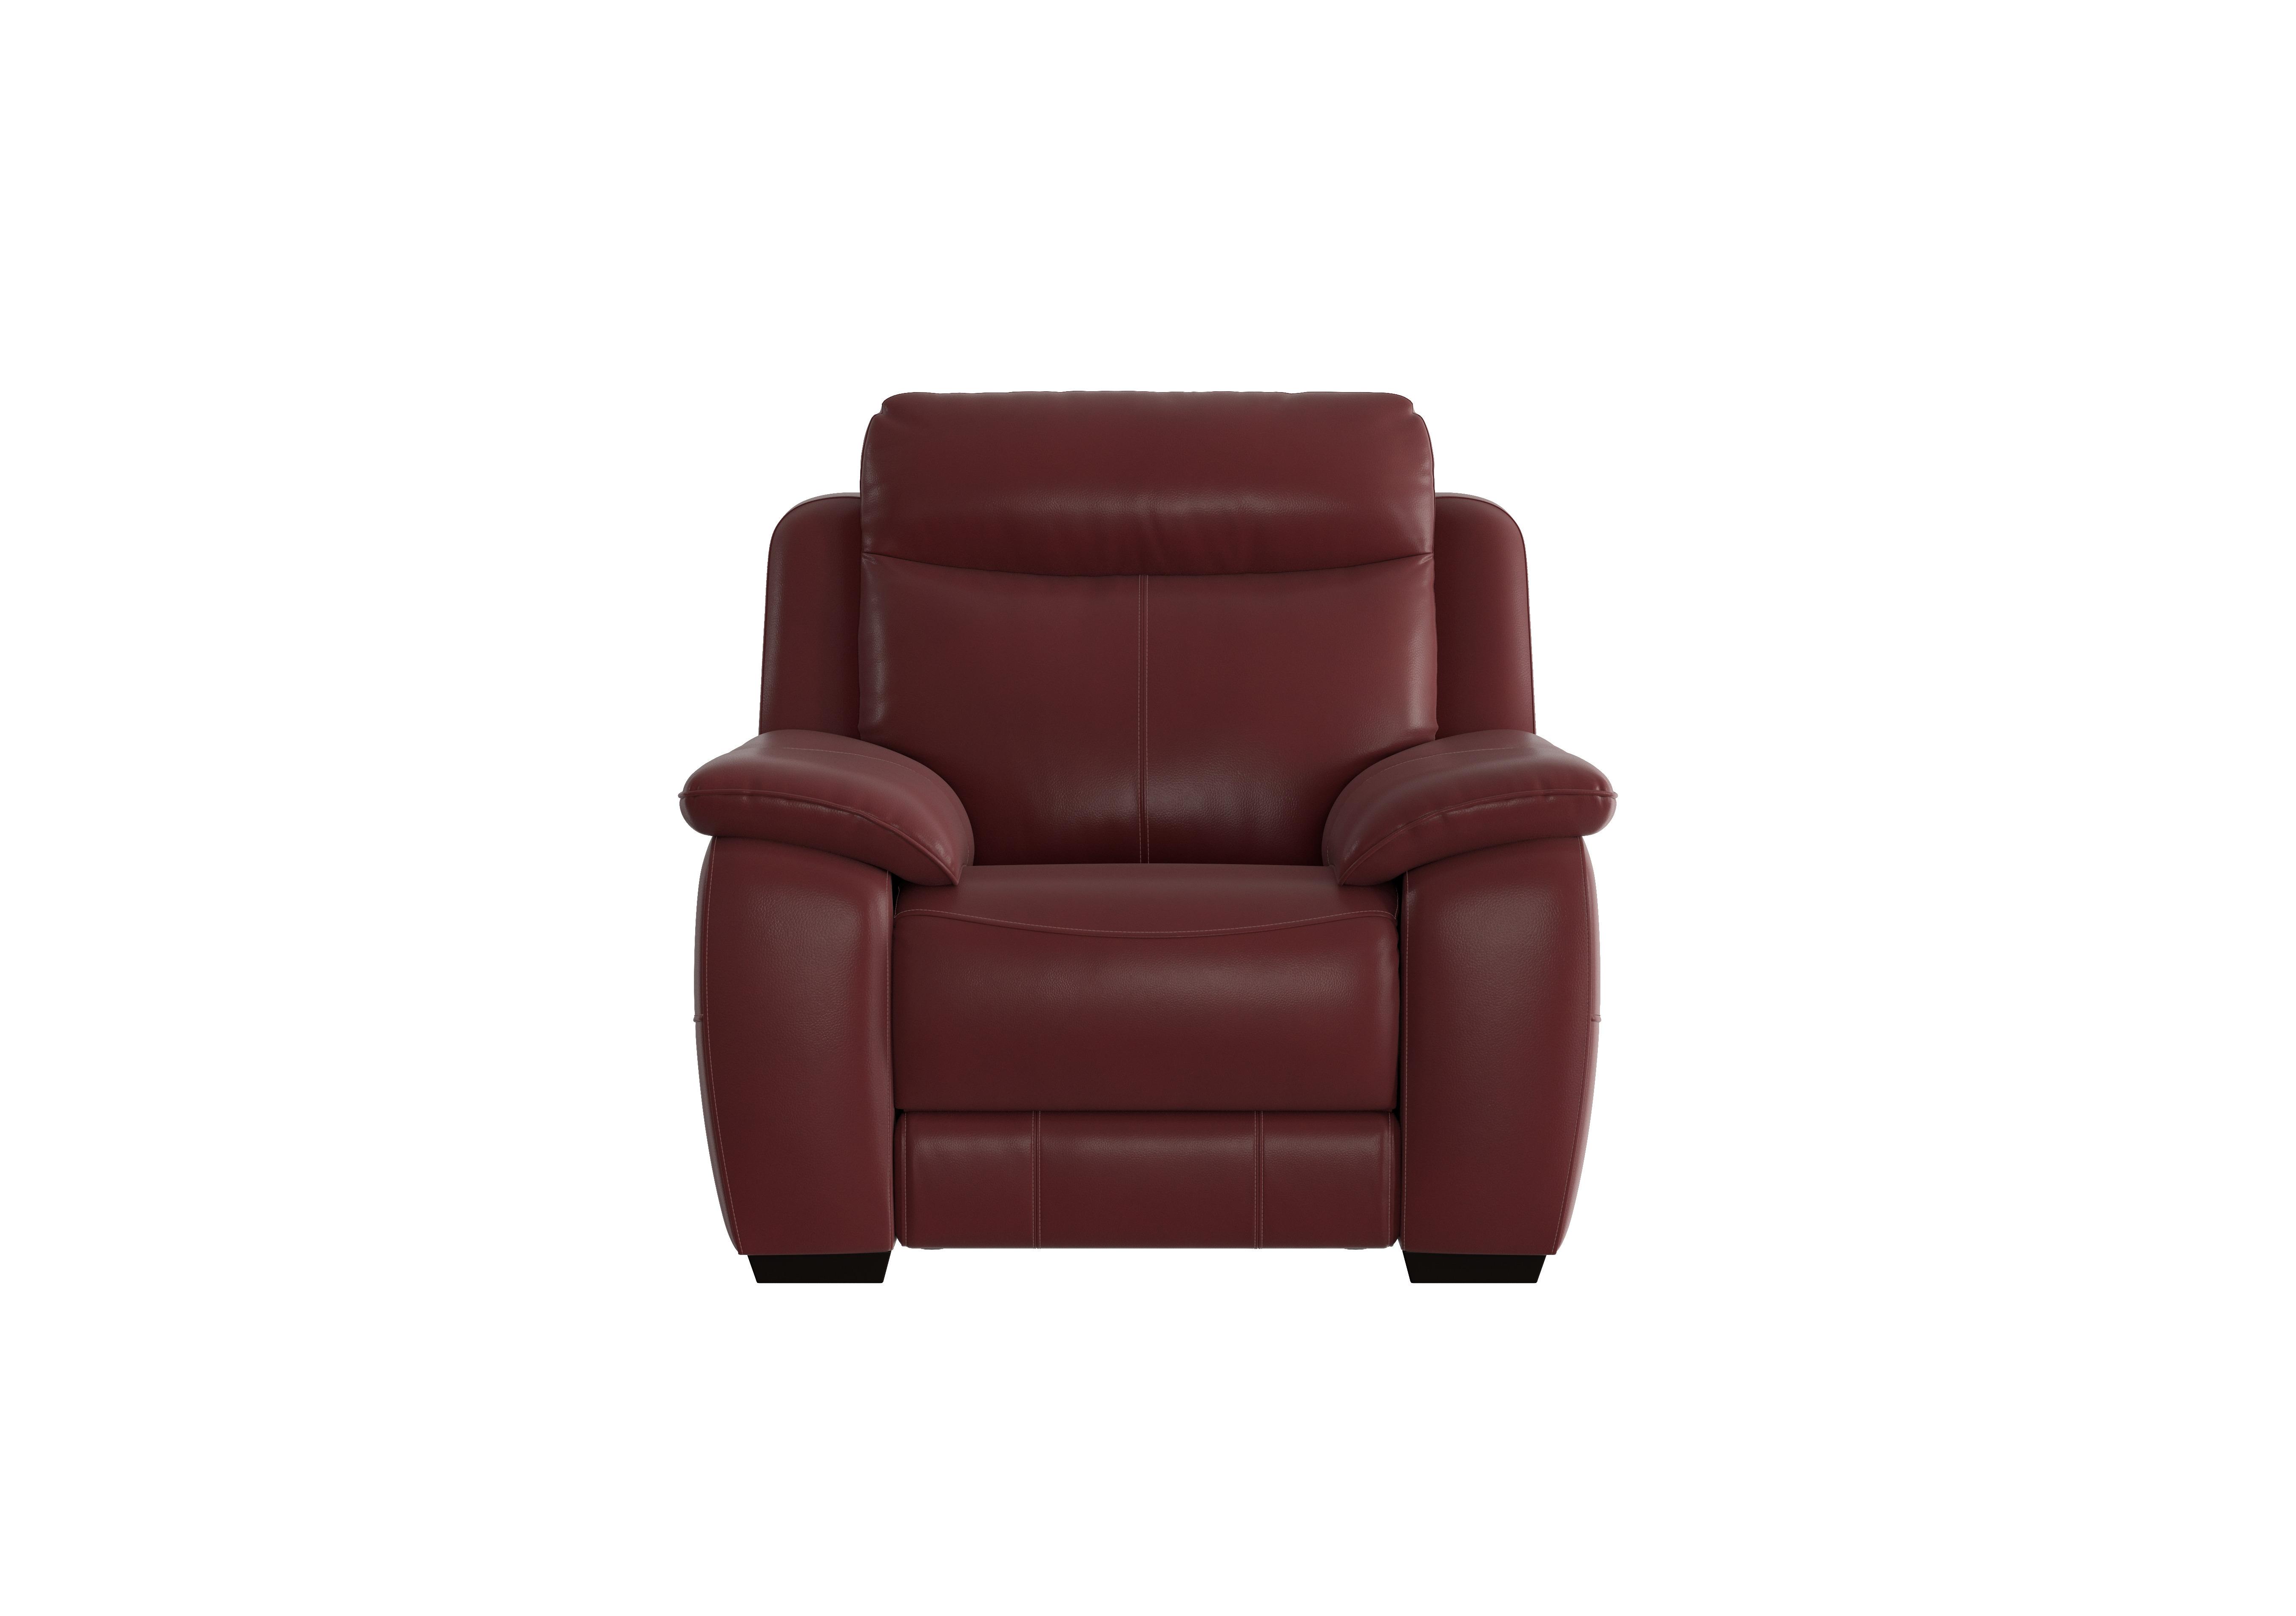 Starlight Express Leather Armchair in Bv-035c Deep Red on Furniture Village